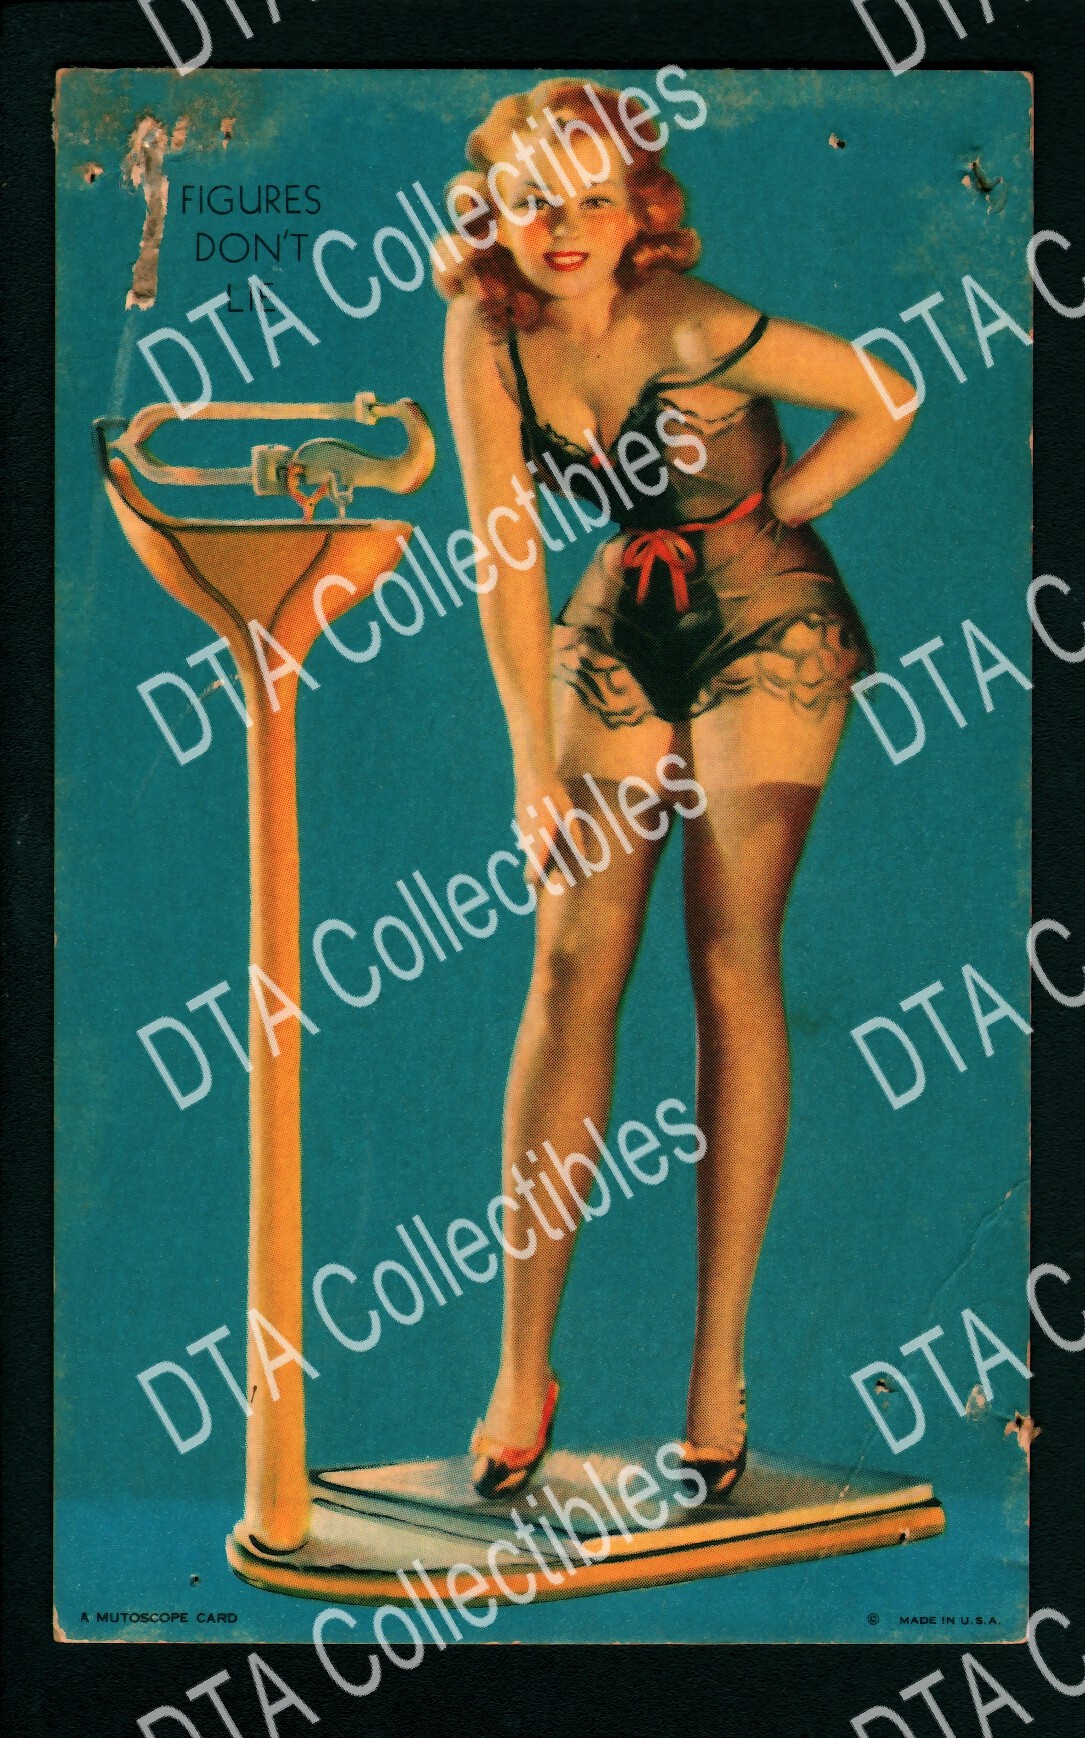 Mutoscope Pin Up Arcade Card Glamour Girls Figures Fr G 1940 Photograph Dta Collectibles